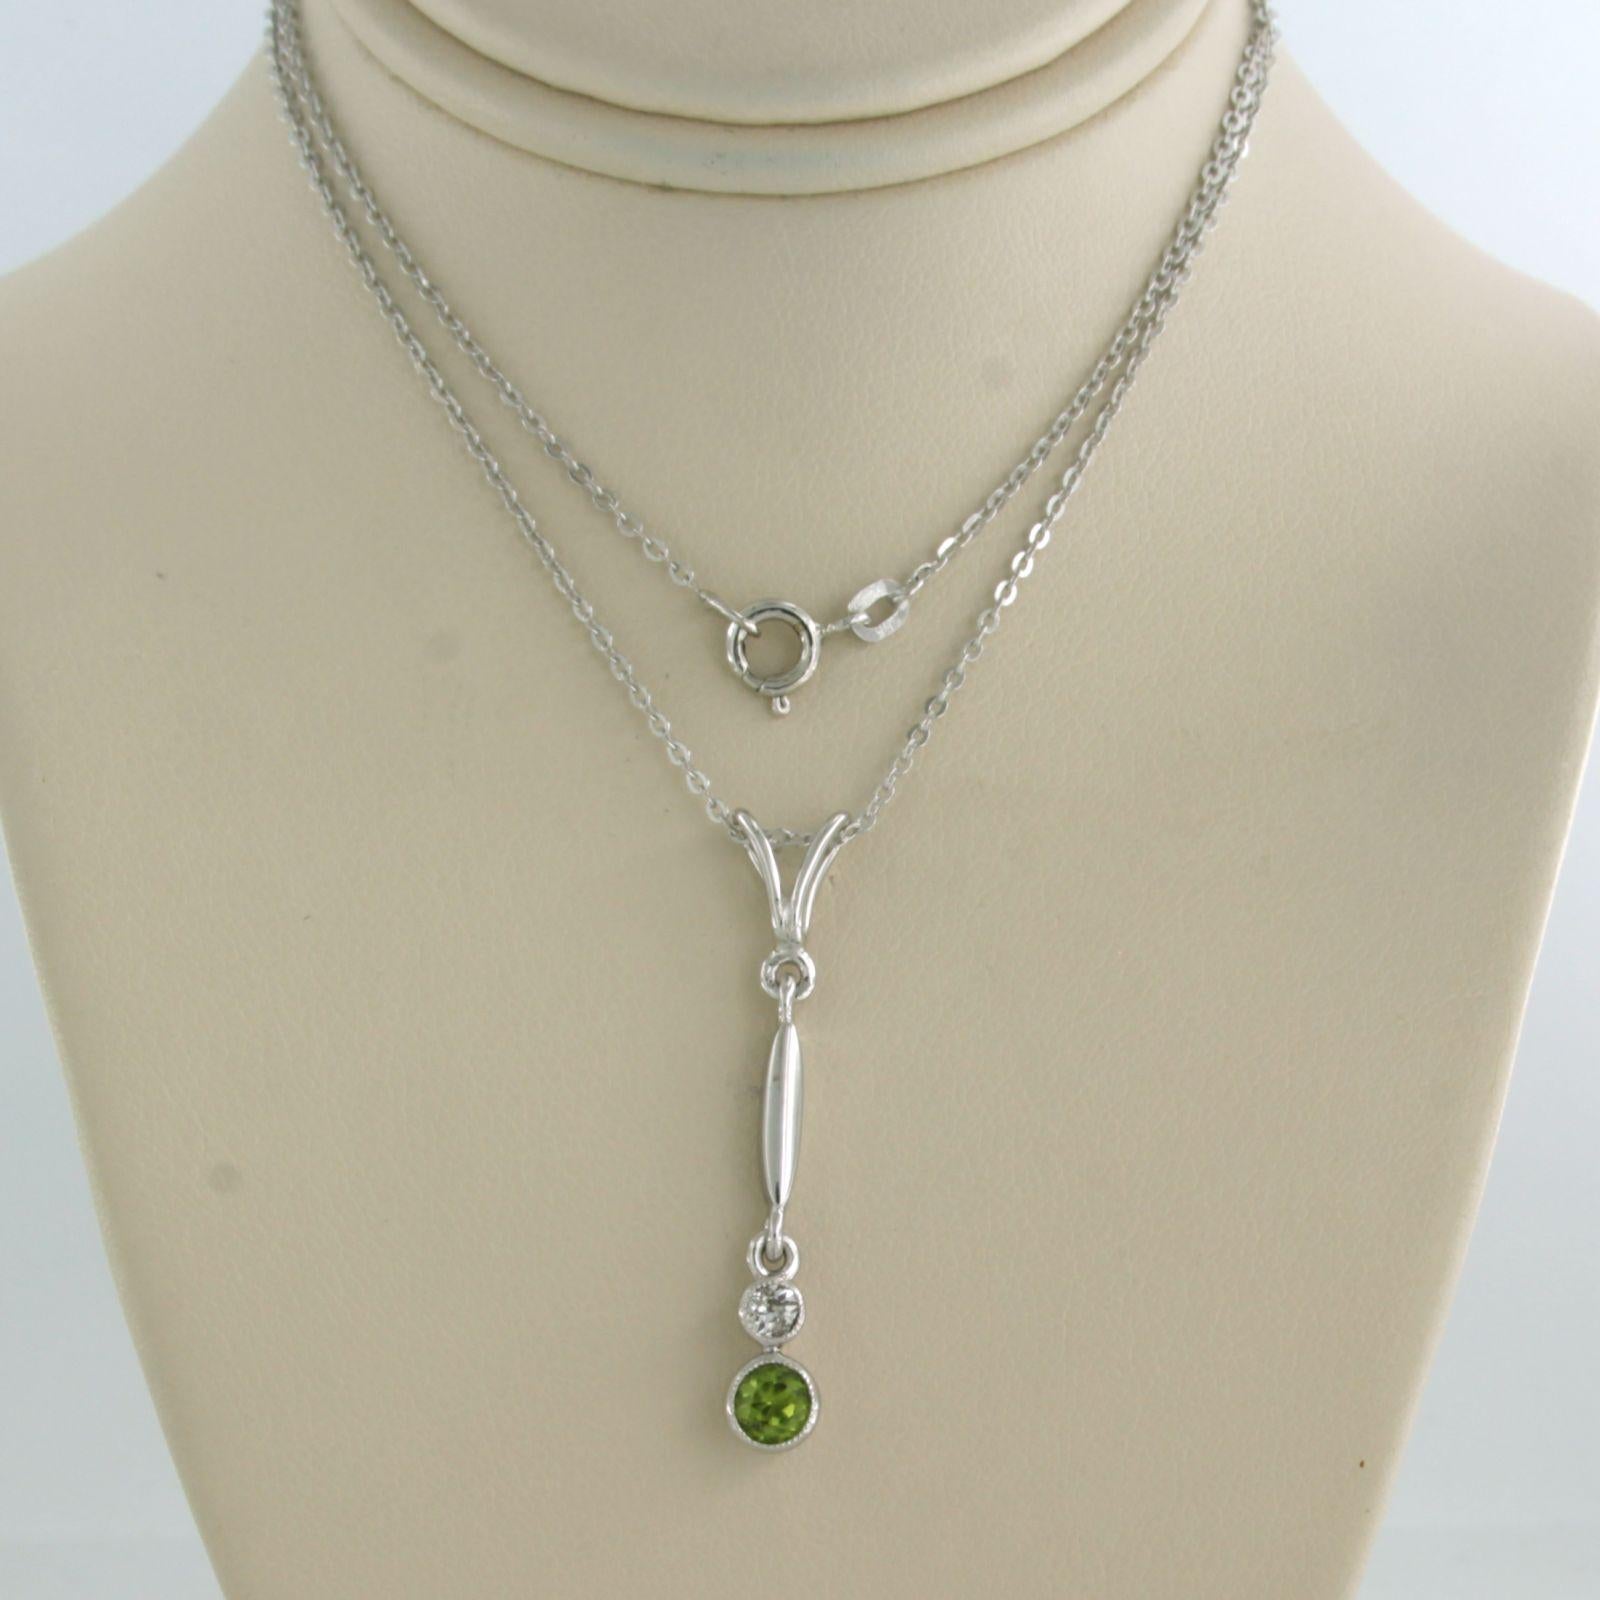 14k white gold necklace with pendant set with peridot and Bolshevik cut diamond. 0.08ct - F/G - SI - 40 cm long

detailed description

the necklace is 40 cm long and 0.7 mm wide

The size of the pendant is 3.7 cm by 5.2 mm wide

total weight: 4.0